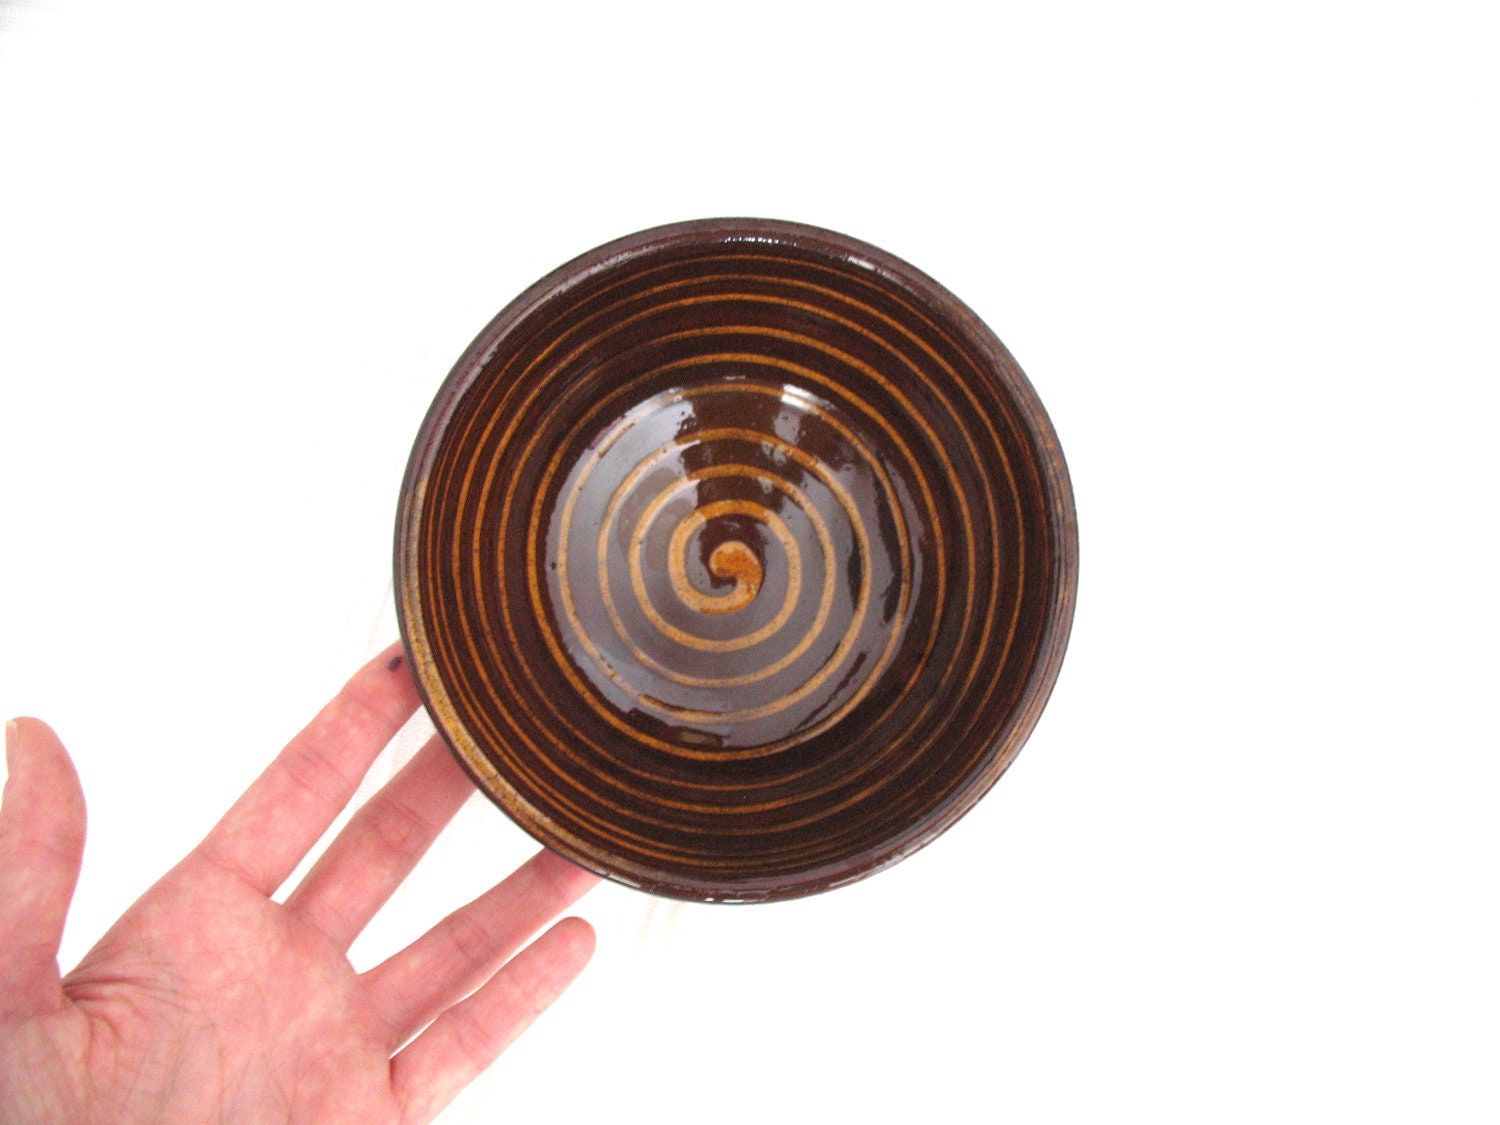 snack bowl - ceramic bowl - glazed pottery - wheel thrown bowl - rustic decoration - ready to ship - BiscuitCuit